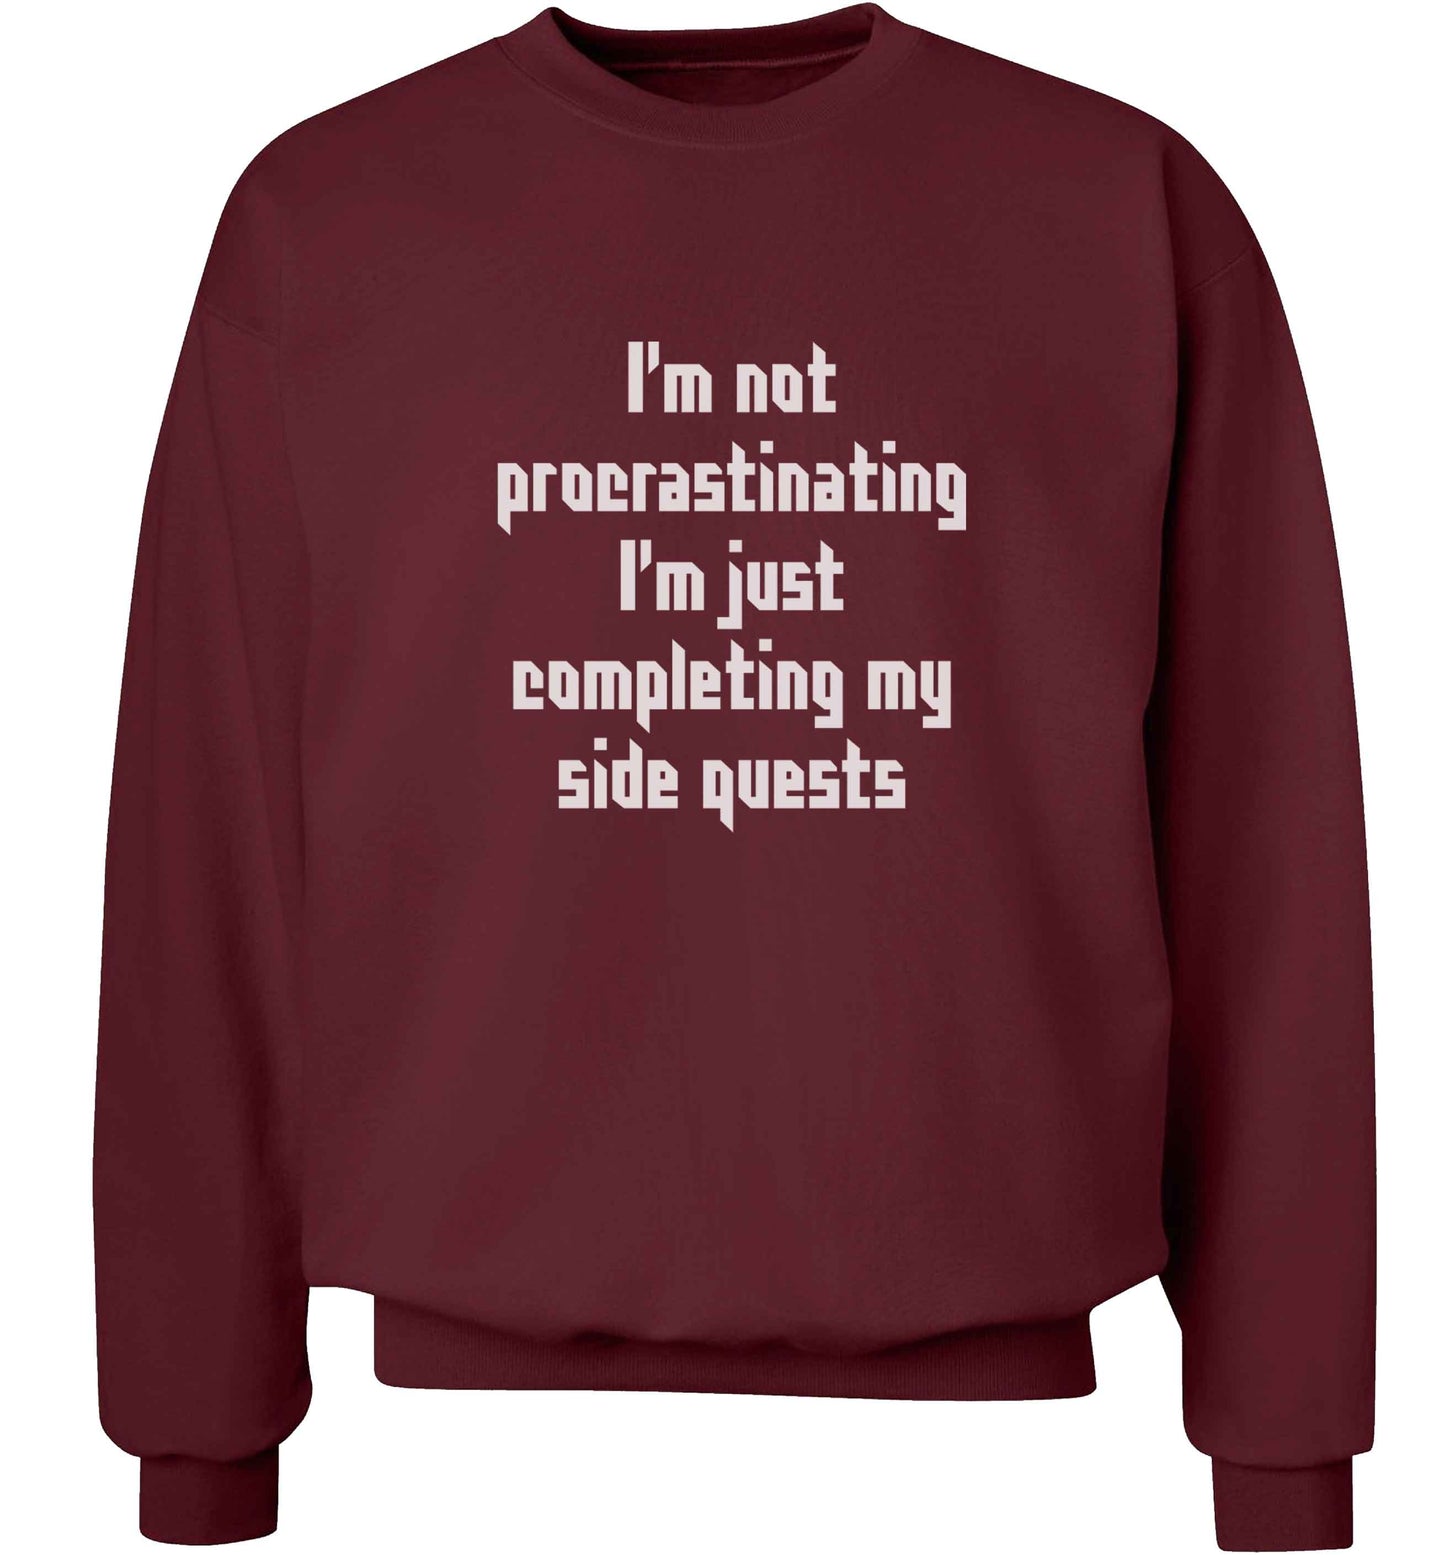 I'm not procrastinating I'm just completing my side quests adult's unisex maroon sweater 2XL